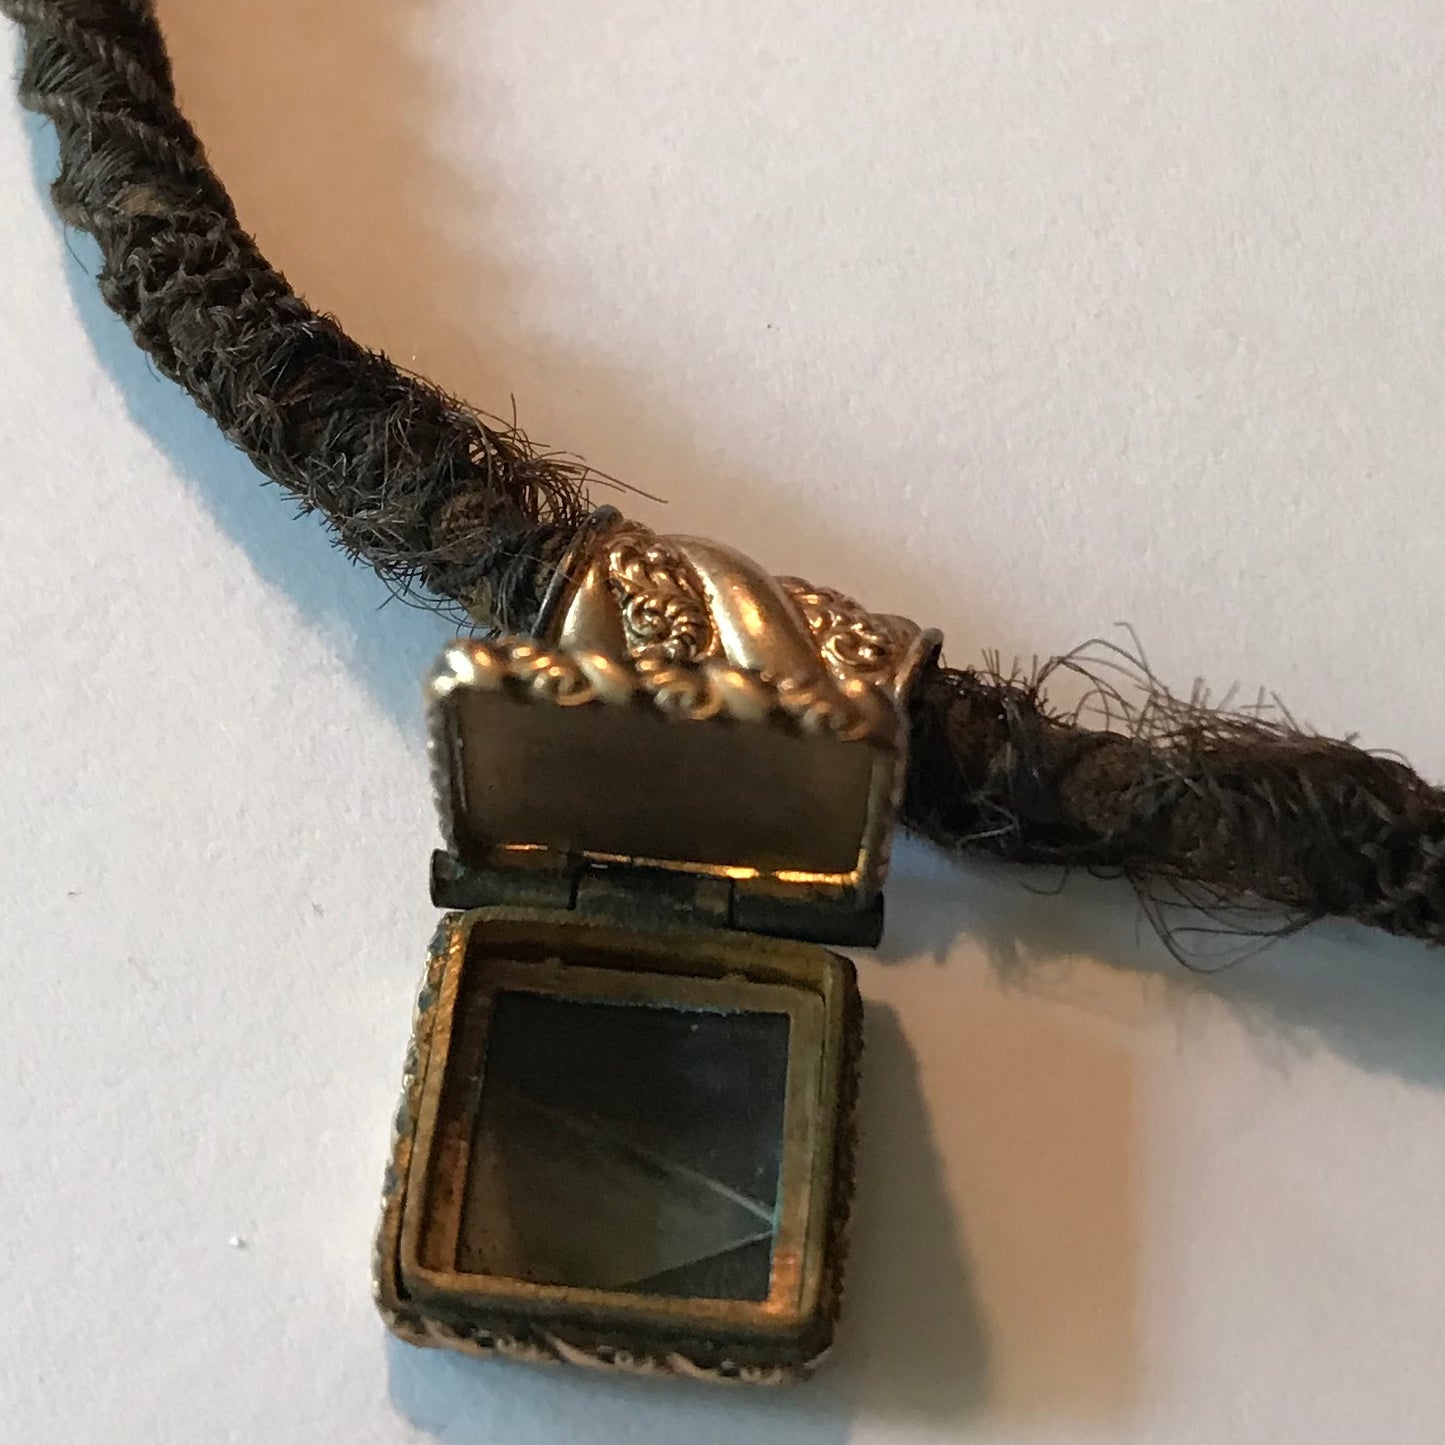 Braided Hair Watch Fob Mourning Jewelry with Locket circa 1800s